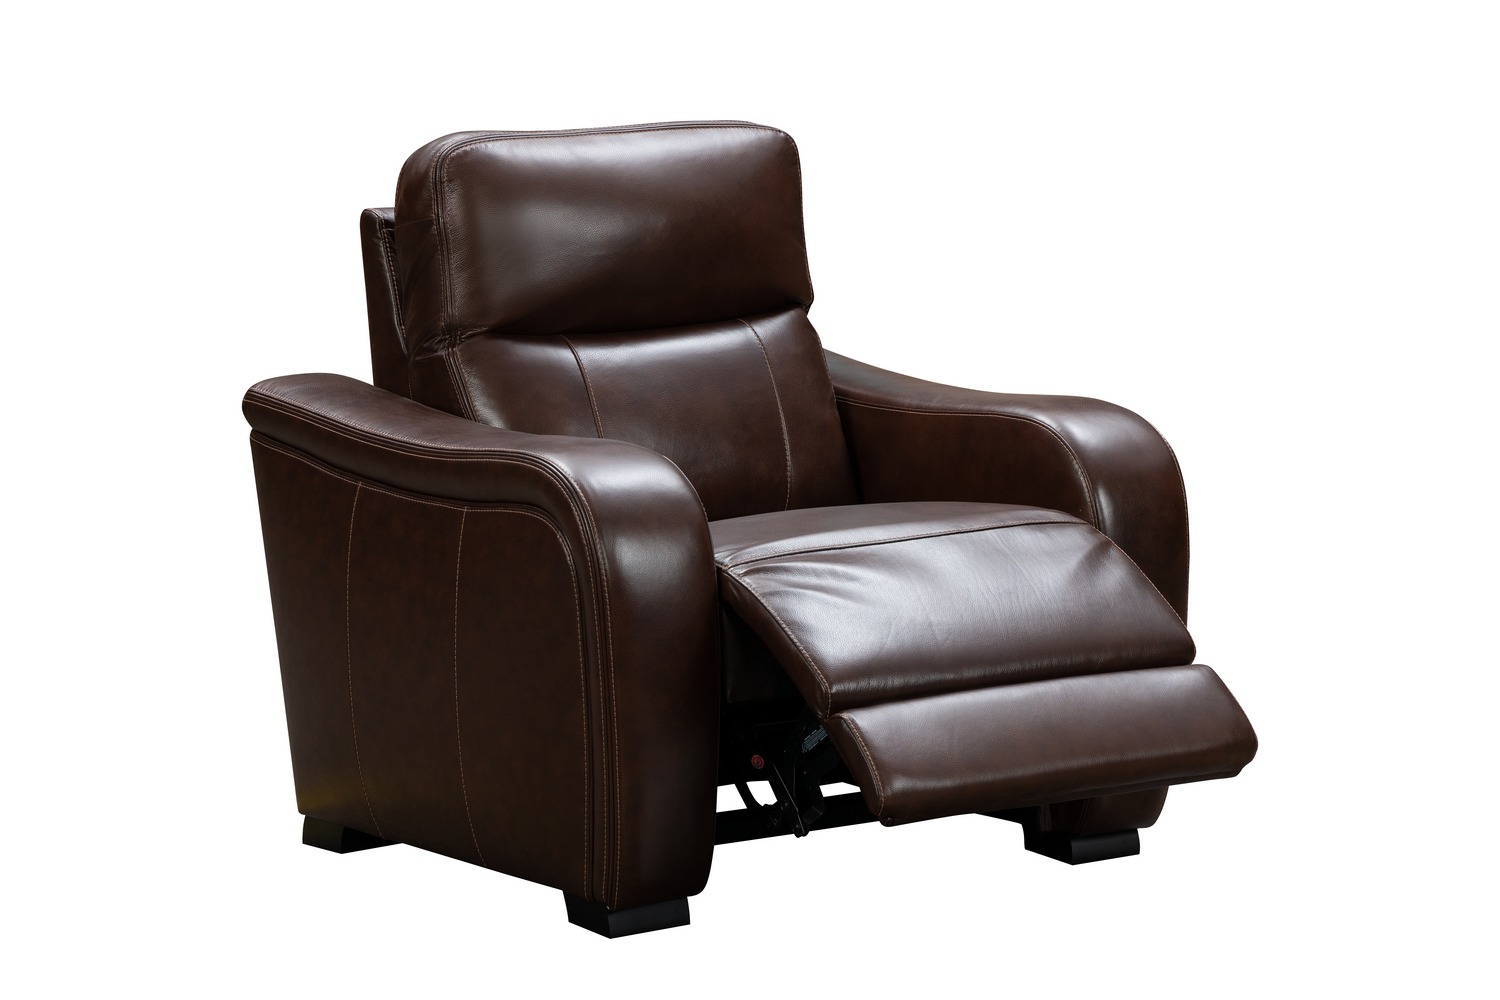 Barcalounger Electra Power Recliner Chair with Power Head Rest and Power Lumbar - Castleton Rustic Brown/Leather Match